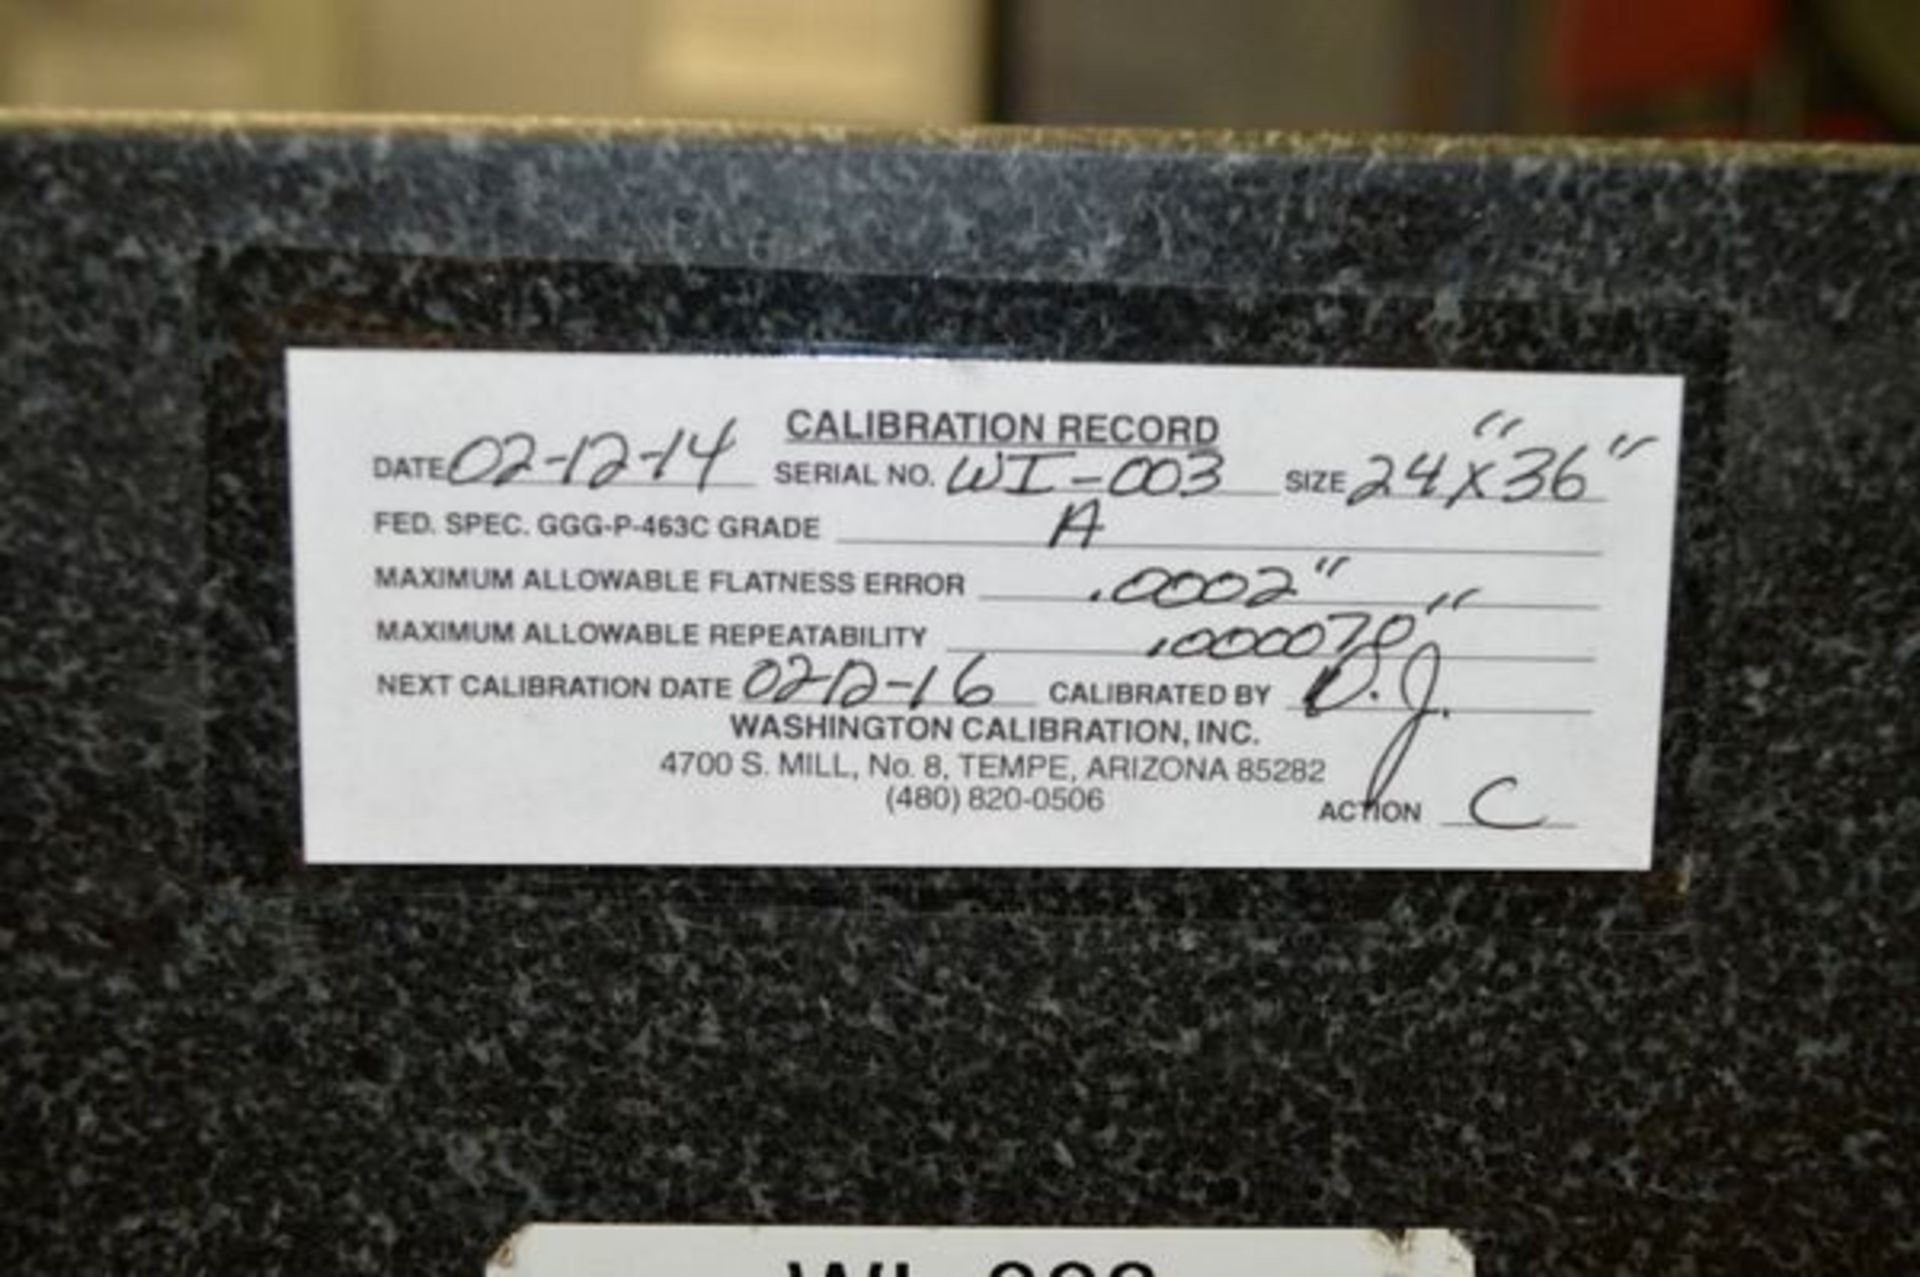 Inspection Table with Rolling Cart Table Size 36 1/2" x 24 1/2" and 4 1/4" Thick, Last Calibrated - Image 3 of 5